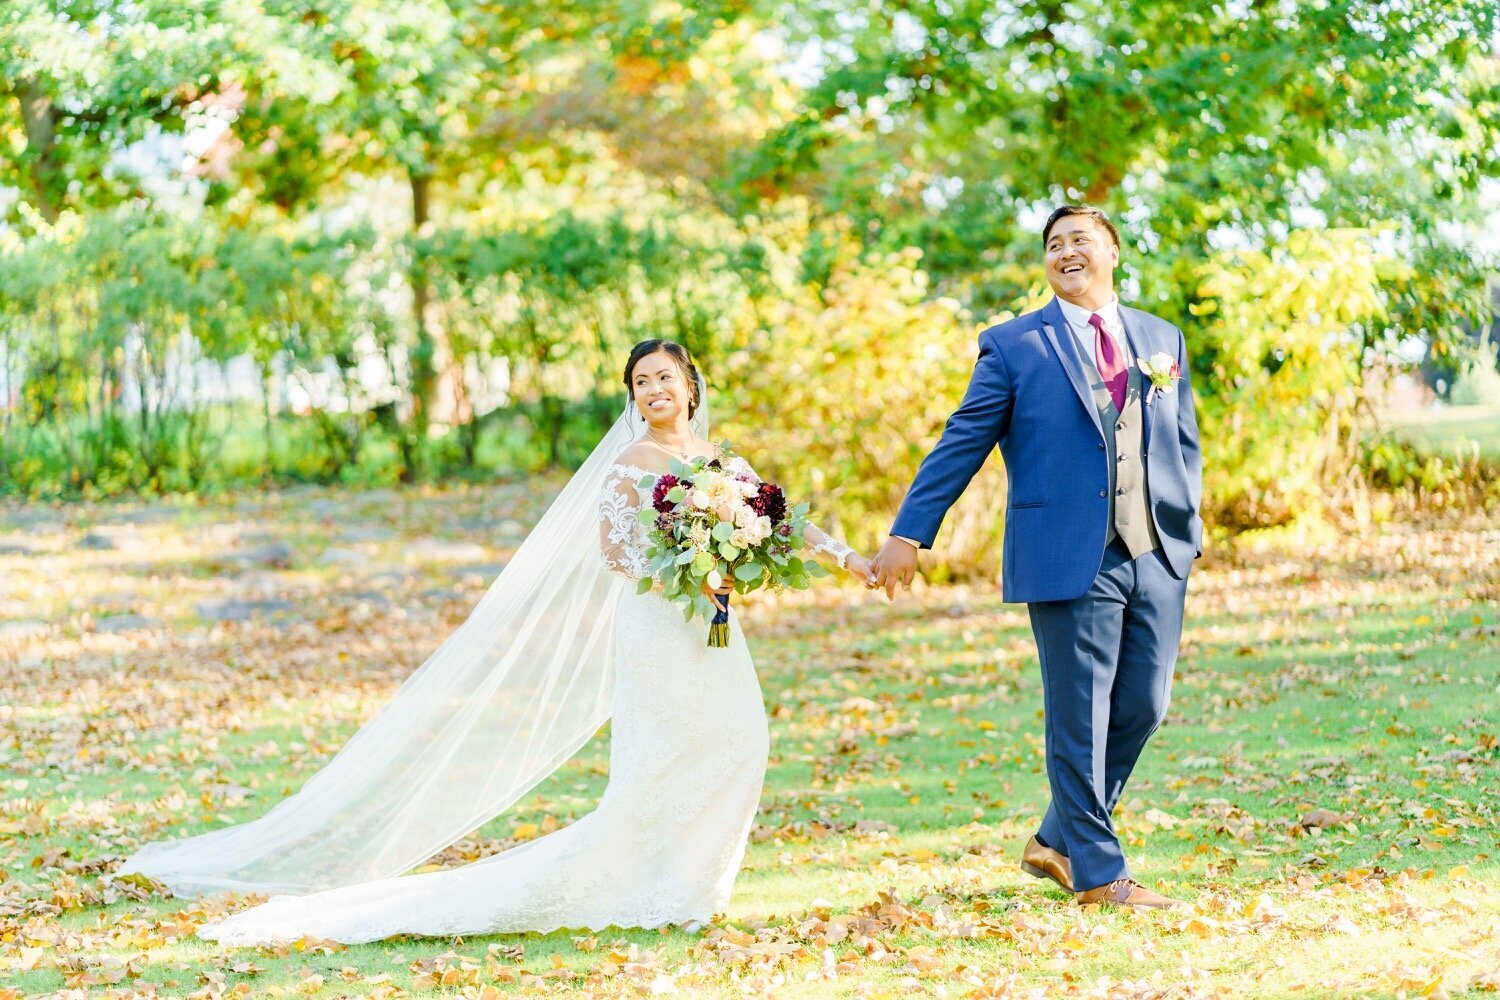 New Hampshire bride and groom holding hands and laughing